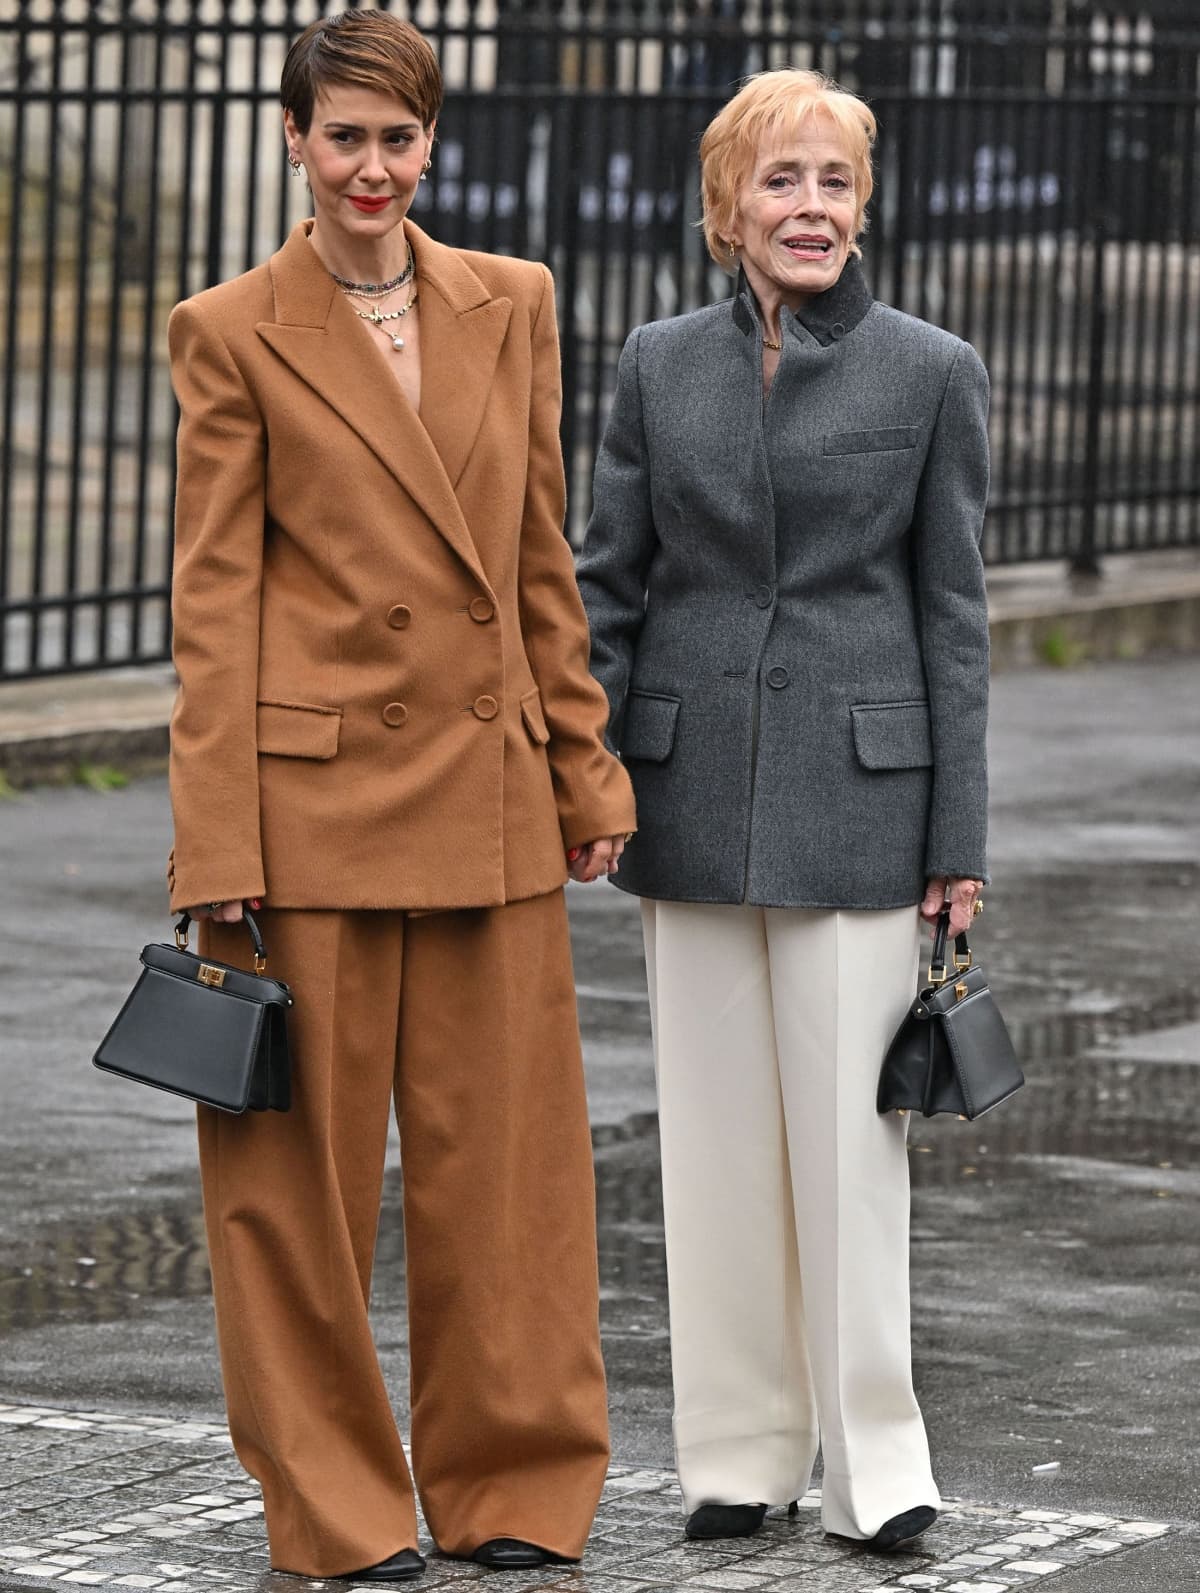 Holland Taylor (pictured with partner Sarah Paulson on the left) played Evelyn Harper and has a net worth of $12 million